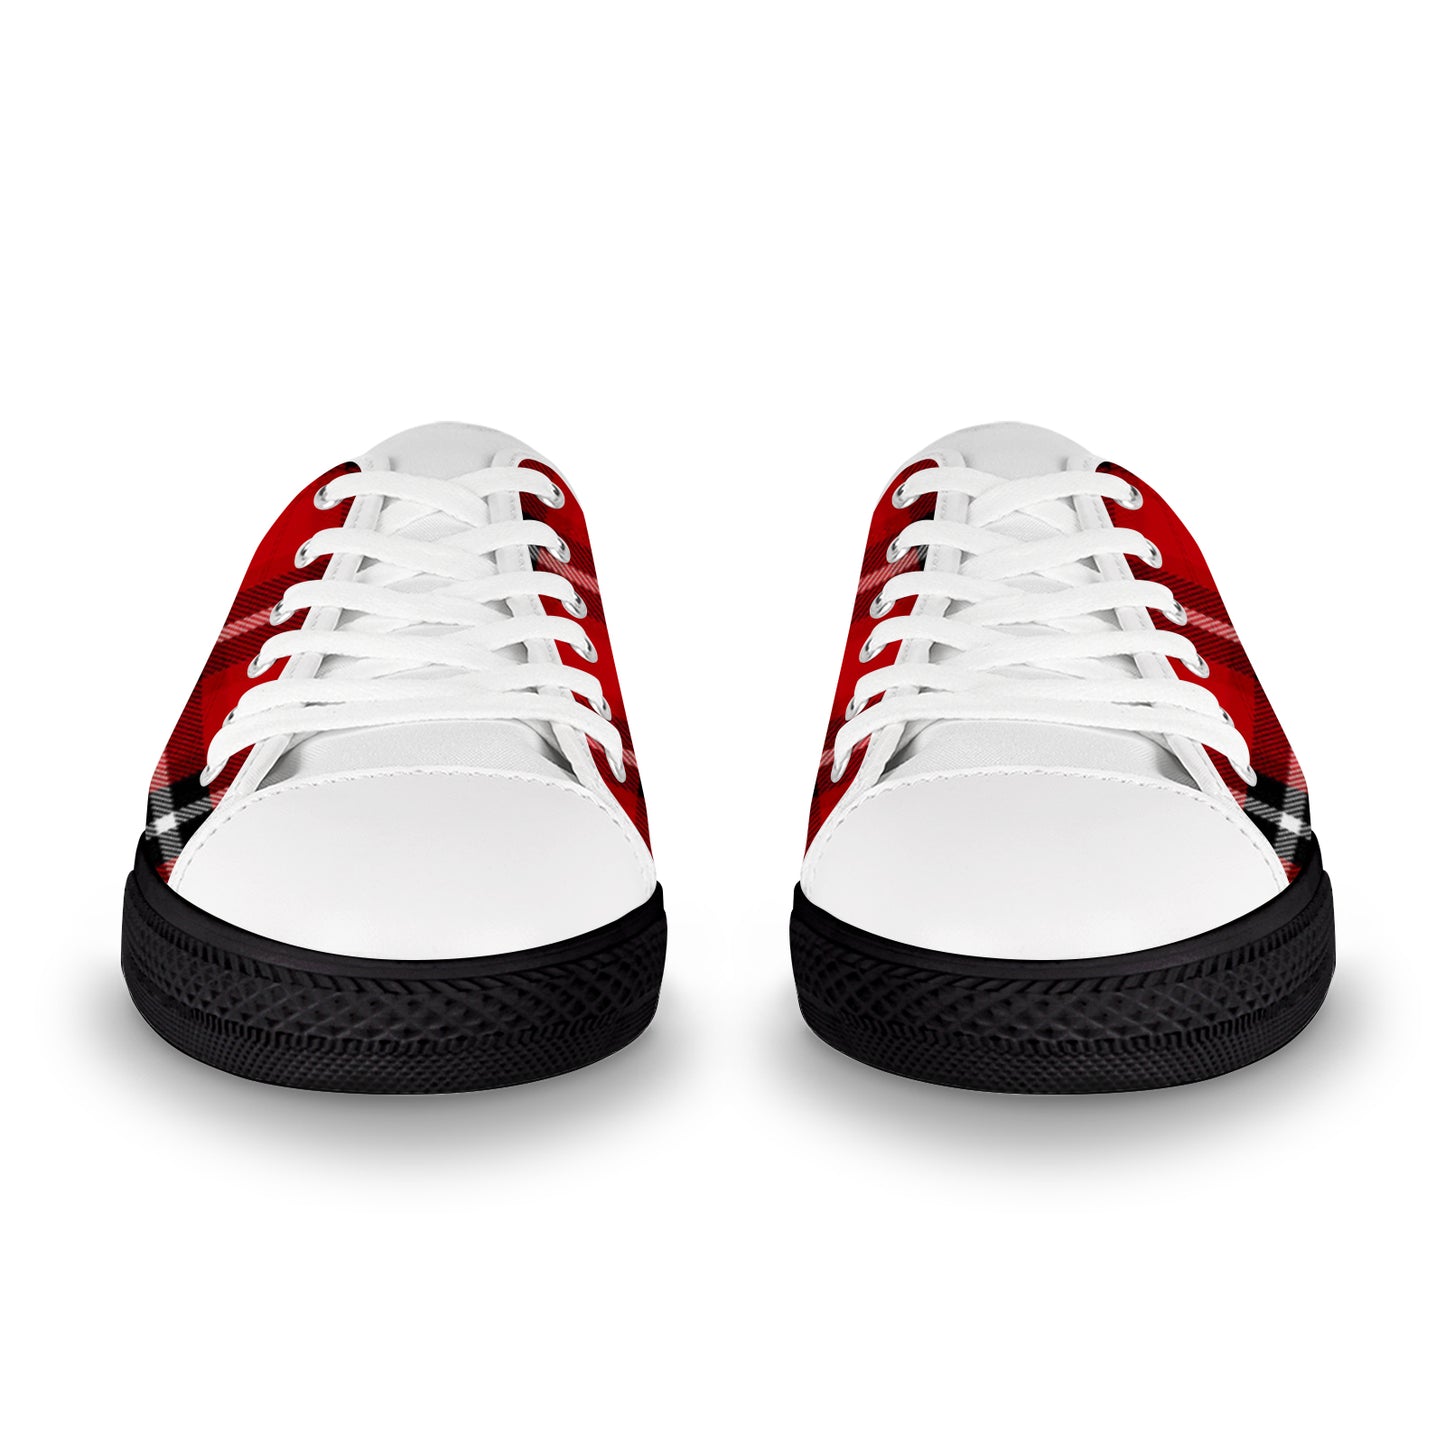 Men's Canvas Sneakers - Red Plaid